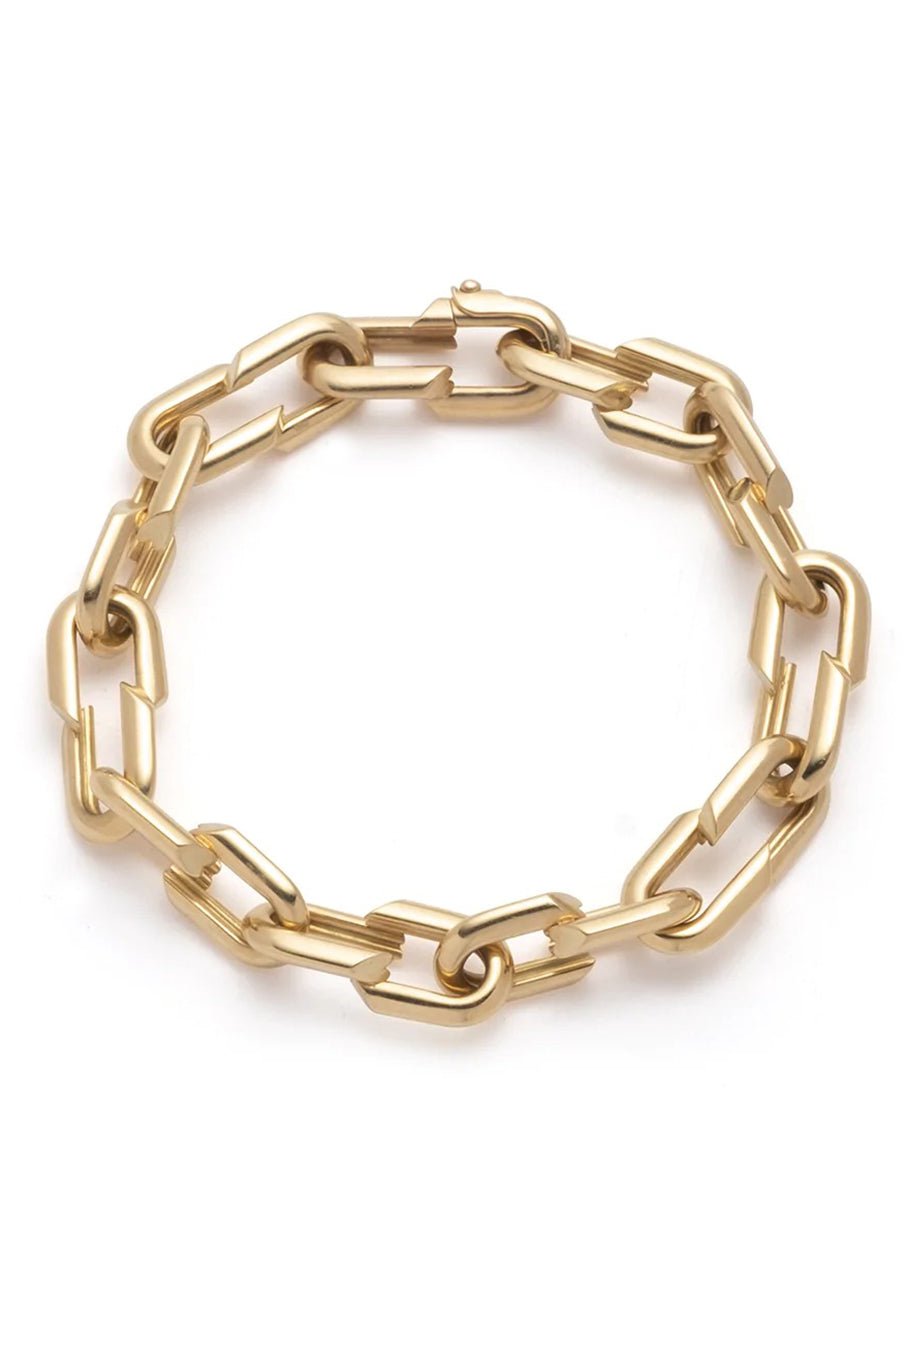 FOUNDRAE-Medium Strong Hearts Link Bracelet-YELLOW GOLD